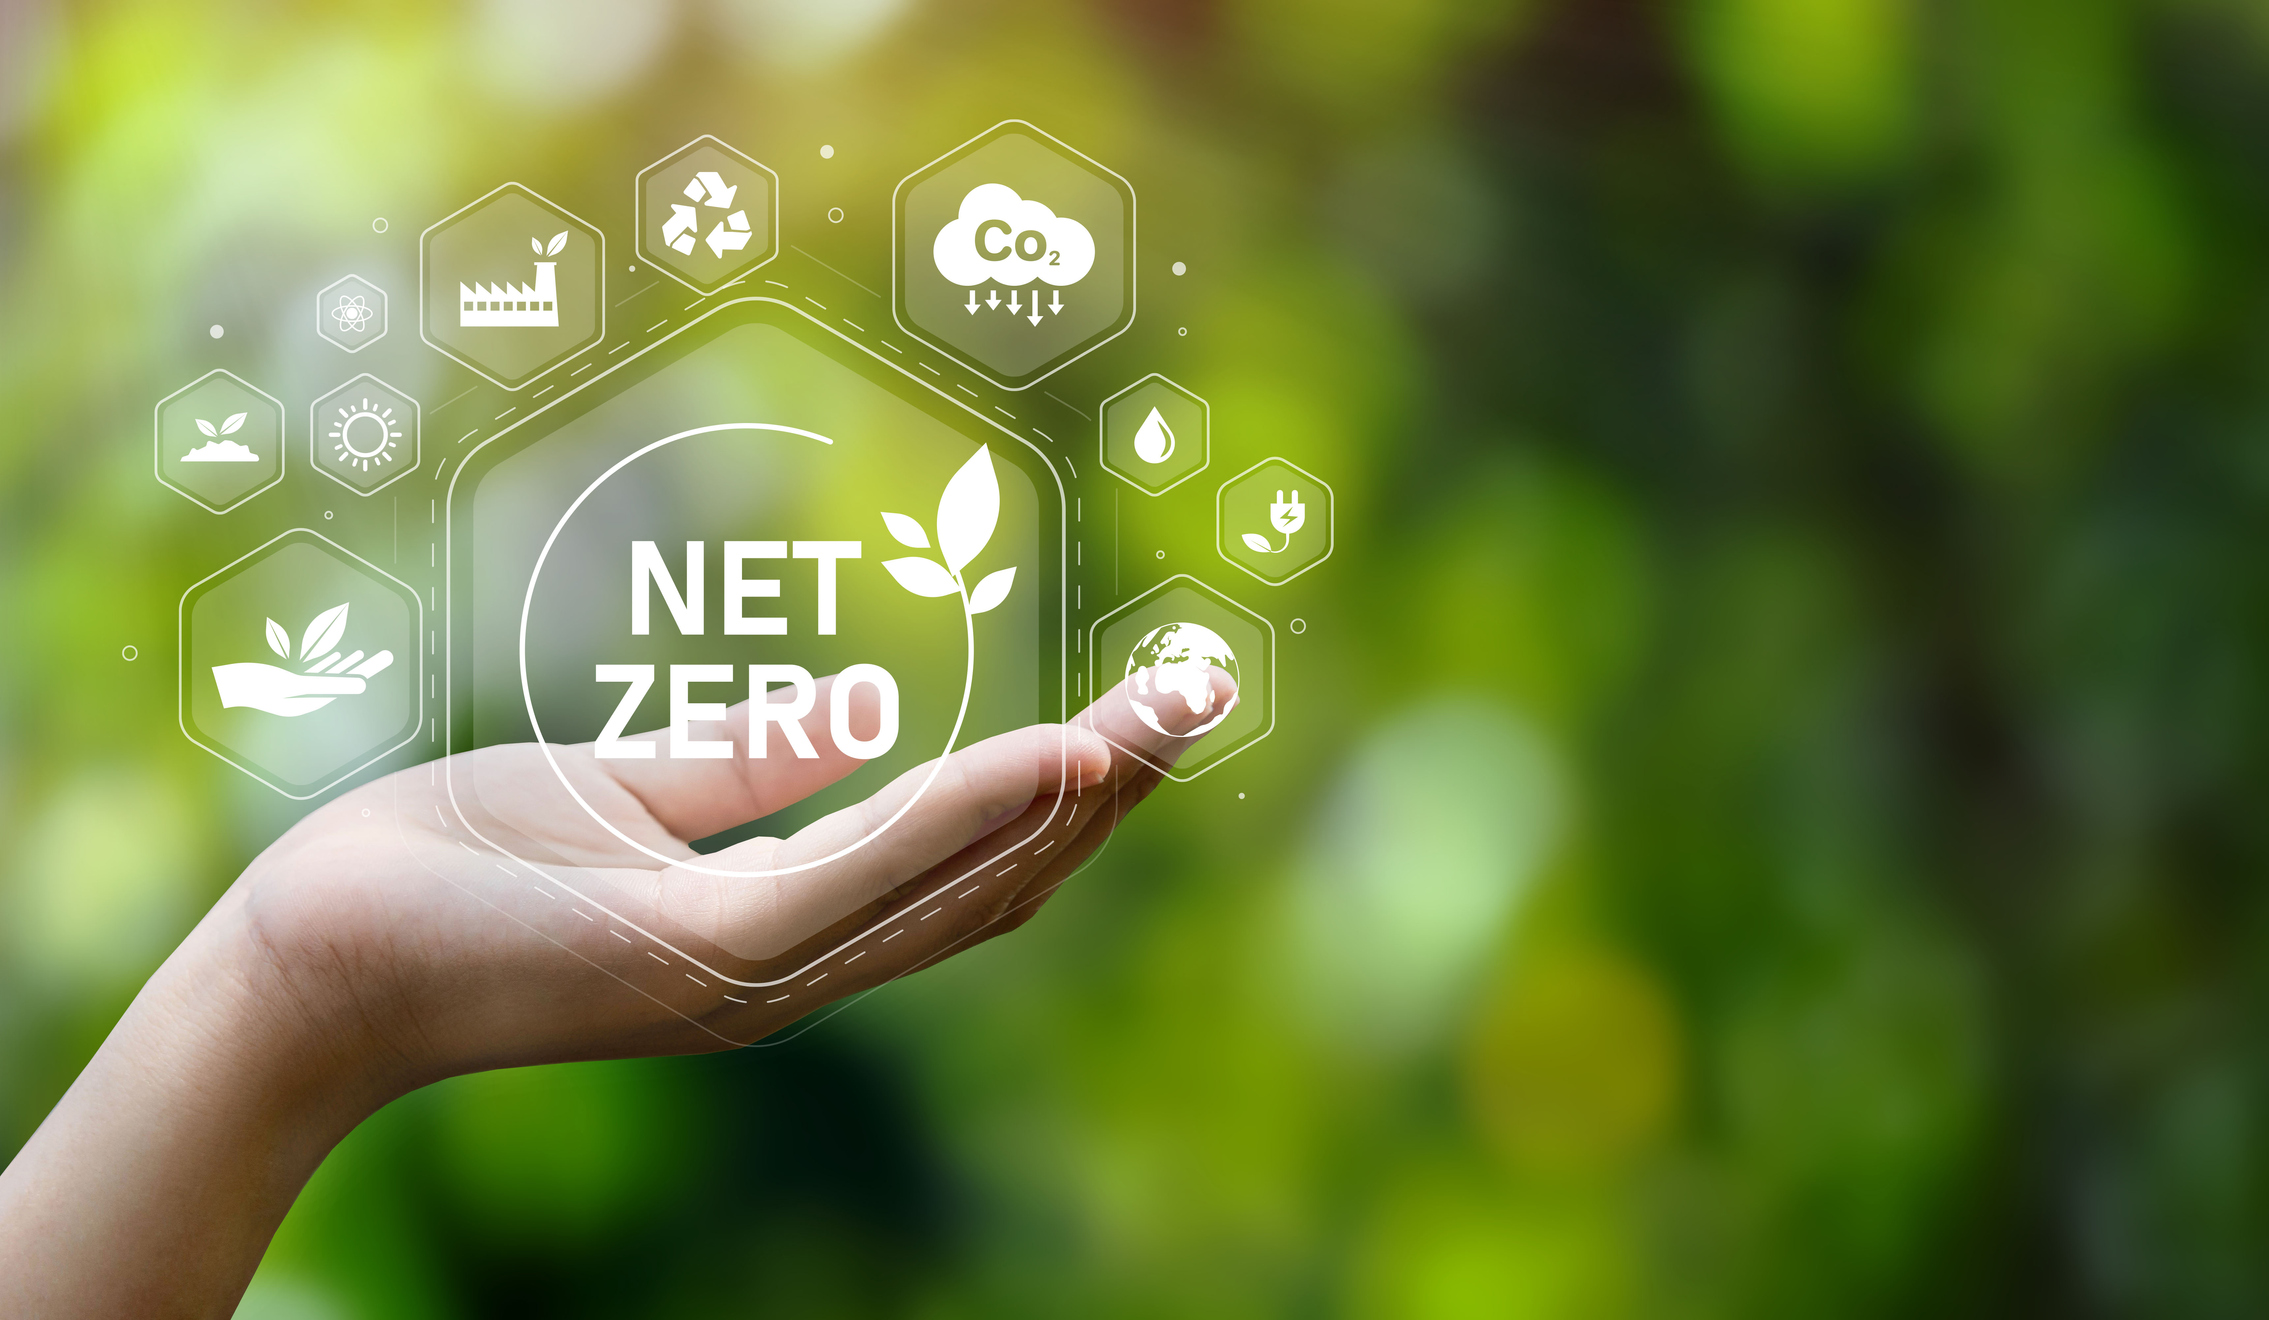 Developing Strategic Solutions for Net Zero Emissions